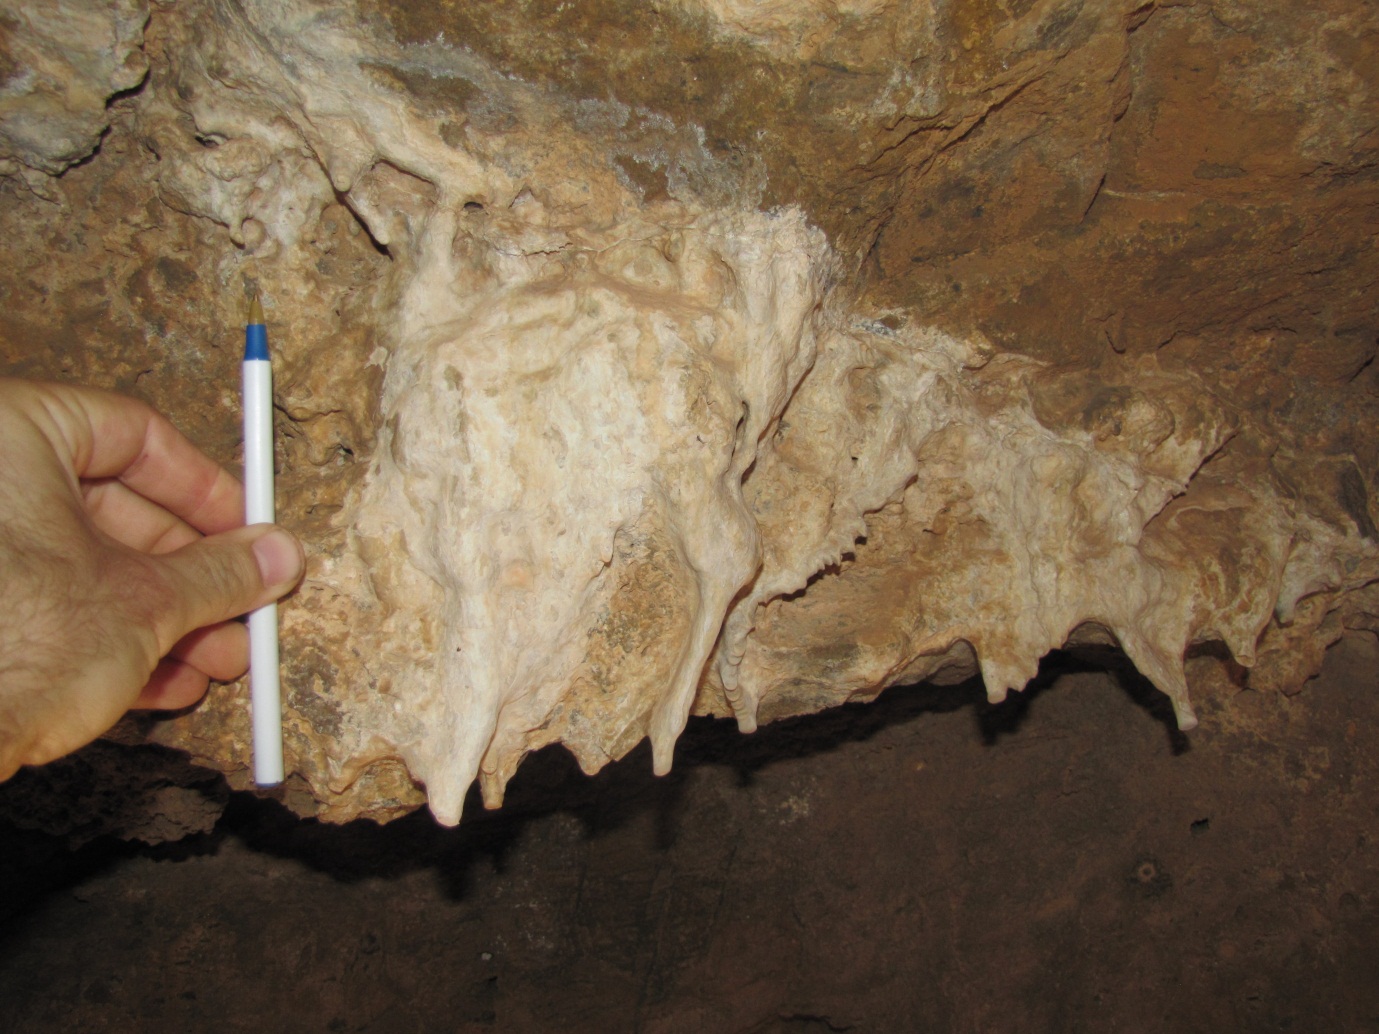 Carbonate precipitation in Lookout Cave